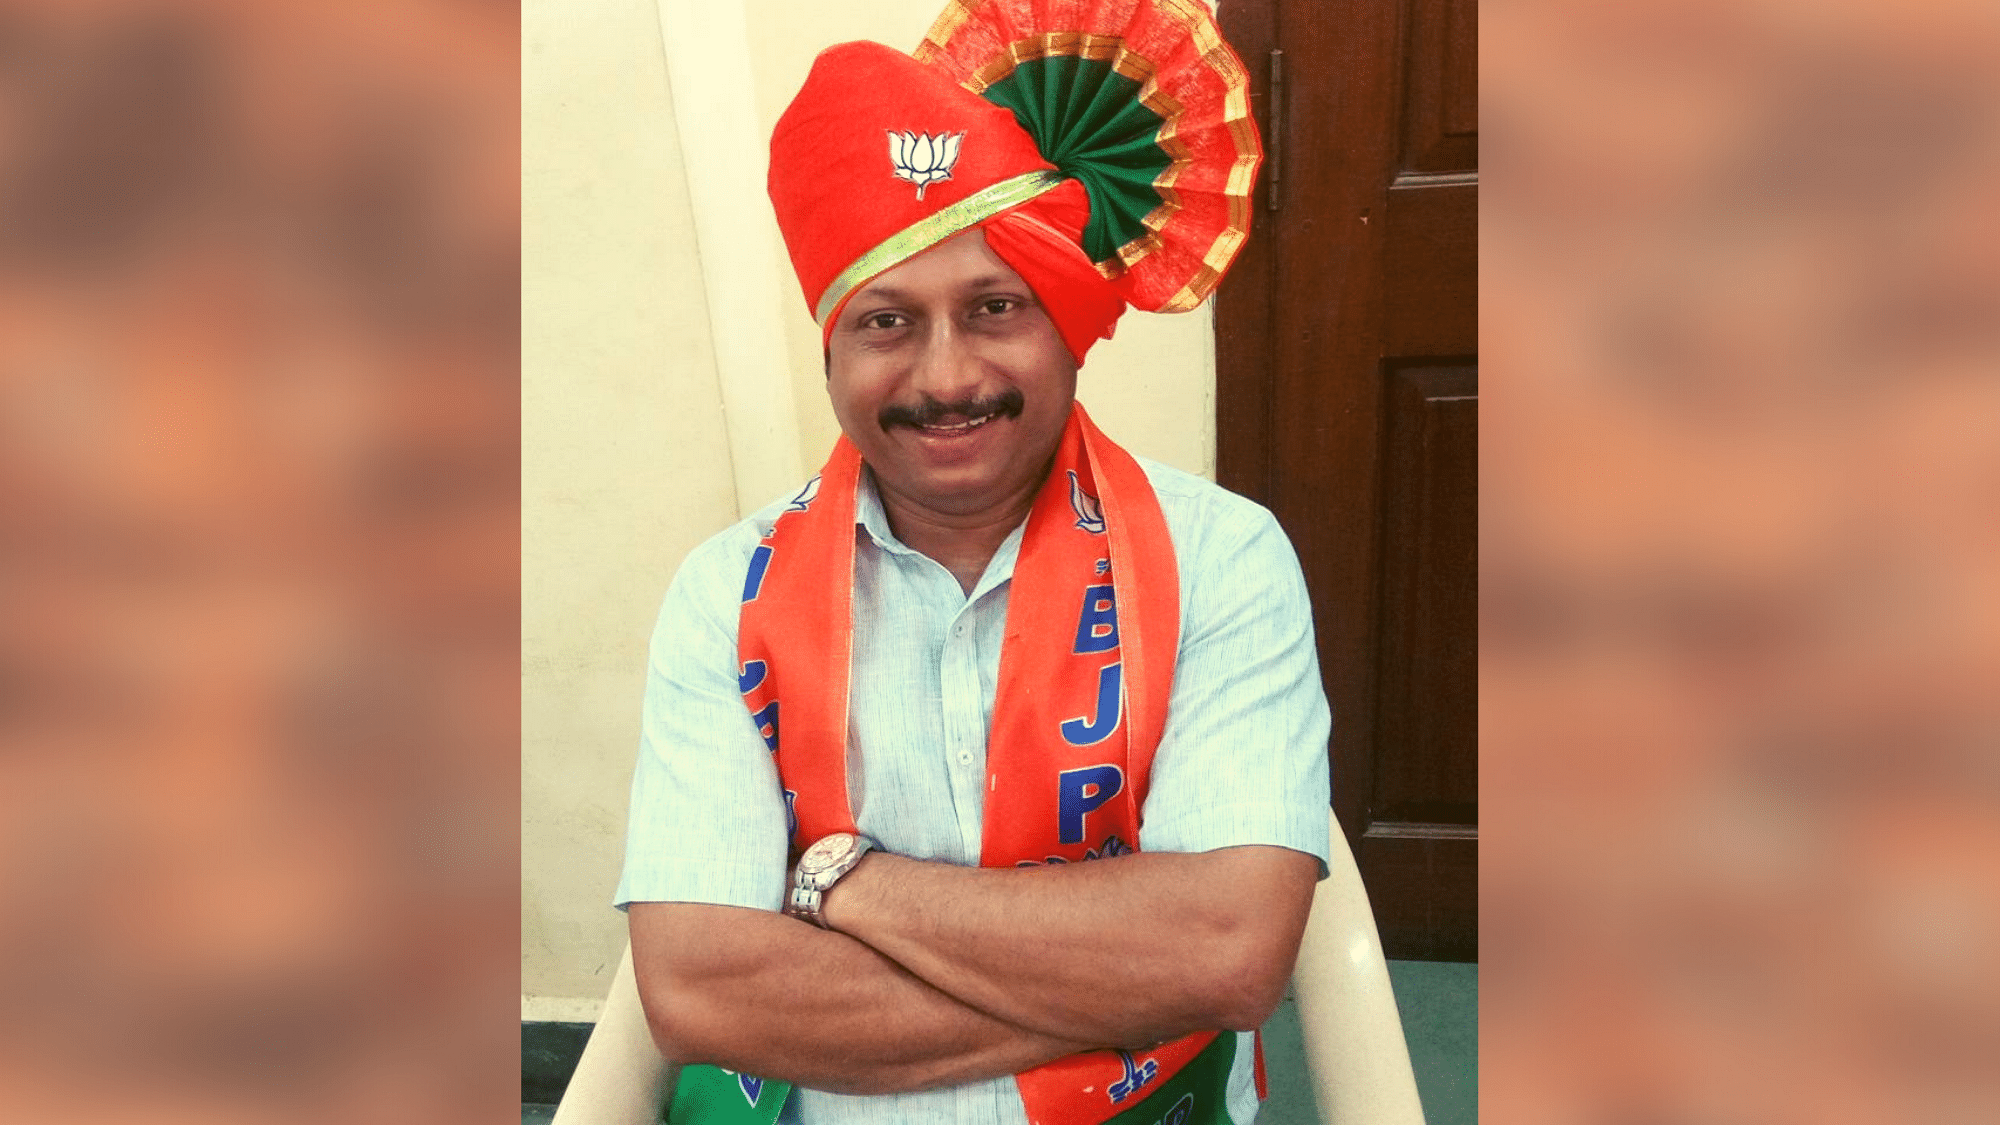 A file photo of BJP corporator Ajay Bahira, who was detained for hosting a birthday celebration during the lockdown.